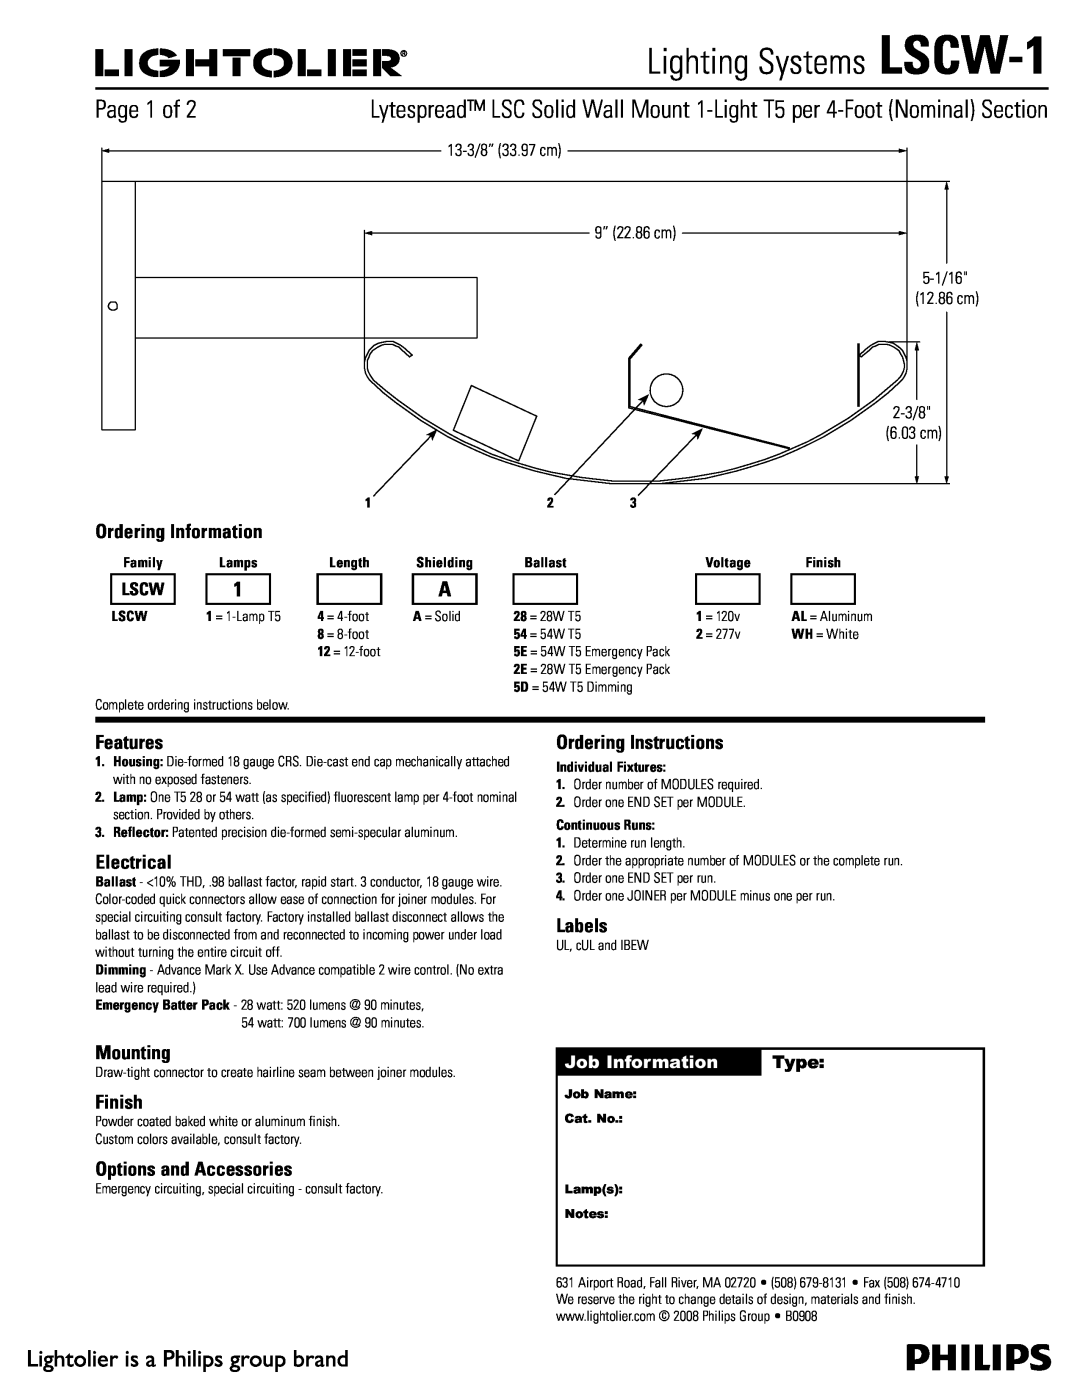 Lightolier LSCW-1 manual Ordering Information, Features, Electrical, Mounting, Finish, Options and Accessories, Labels 